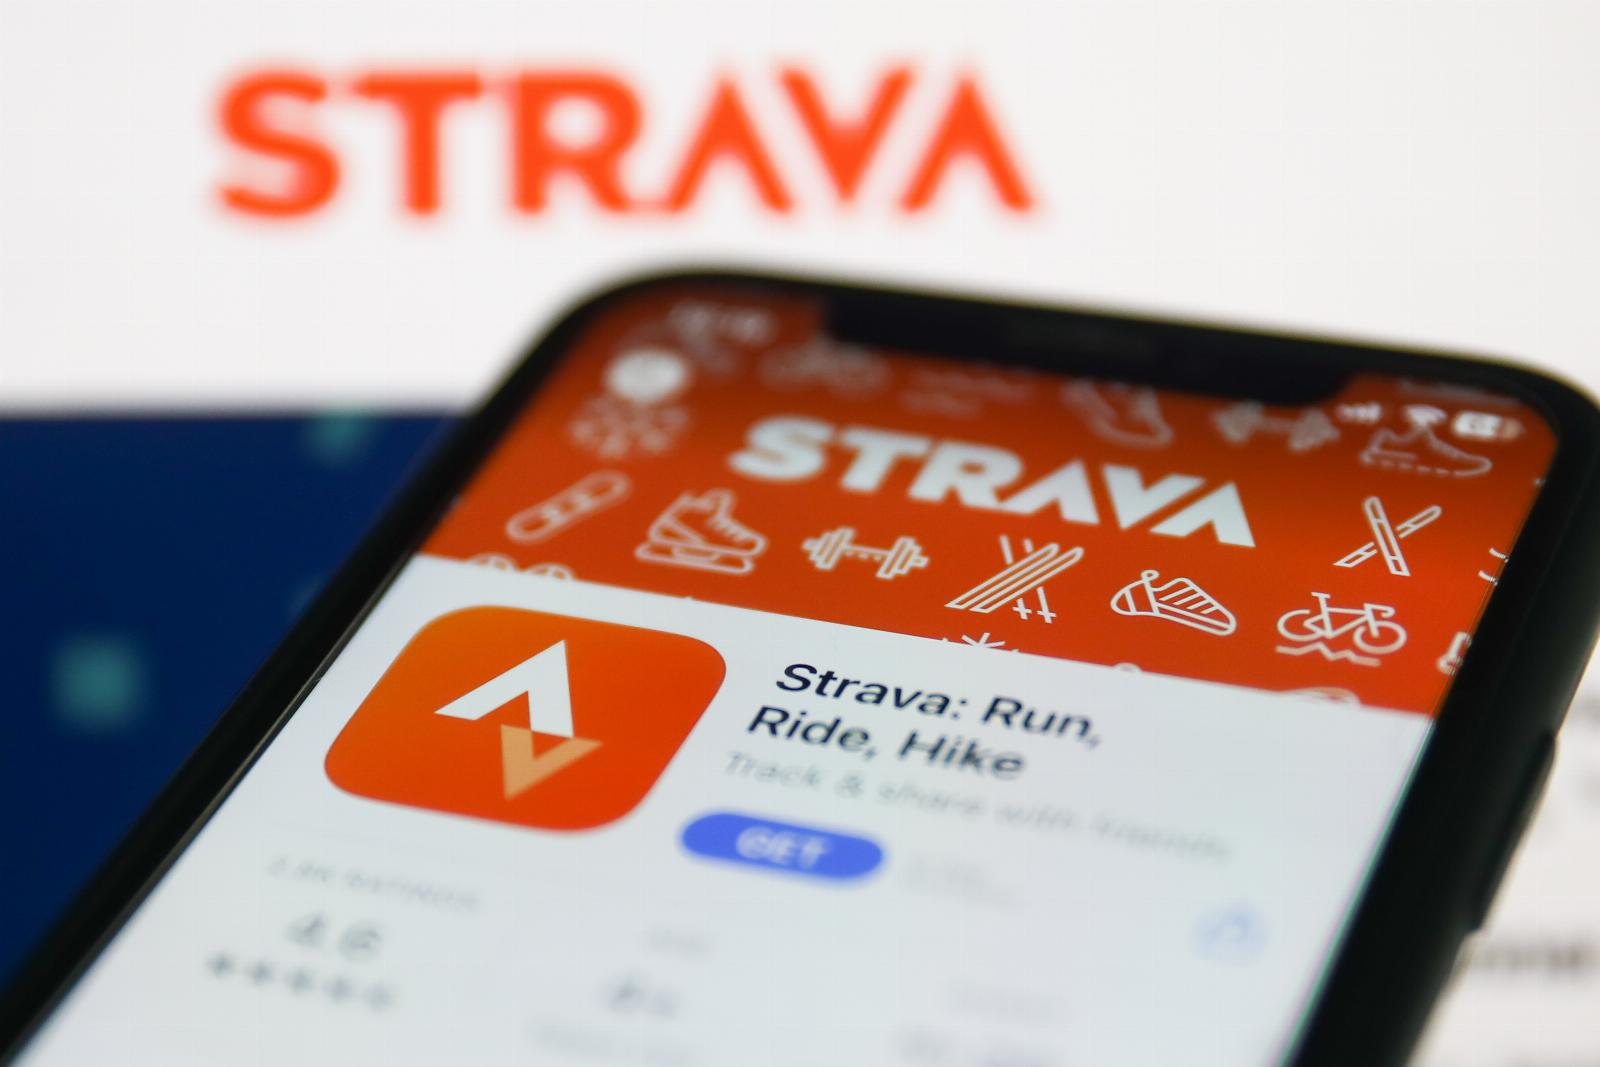 After year-long search, Strava appoints YouTube exec Michael Martin as new CEO